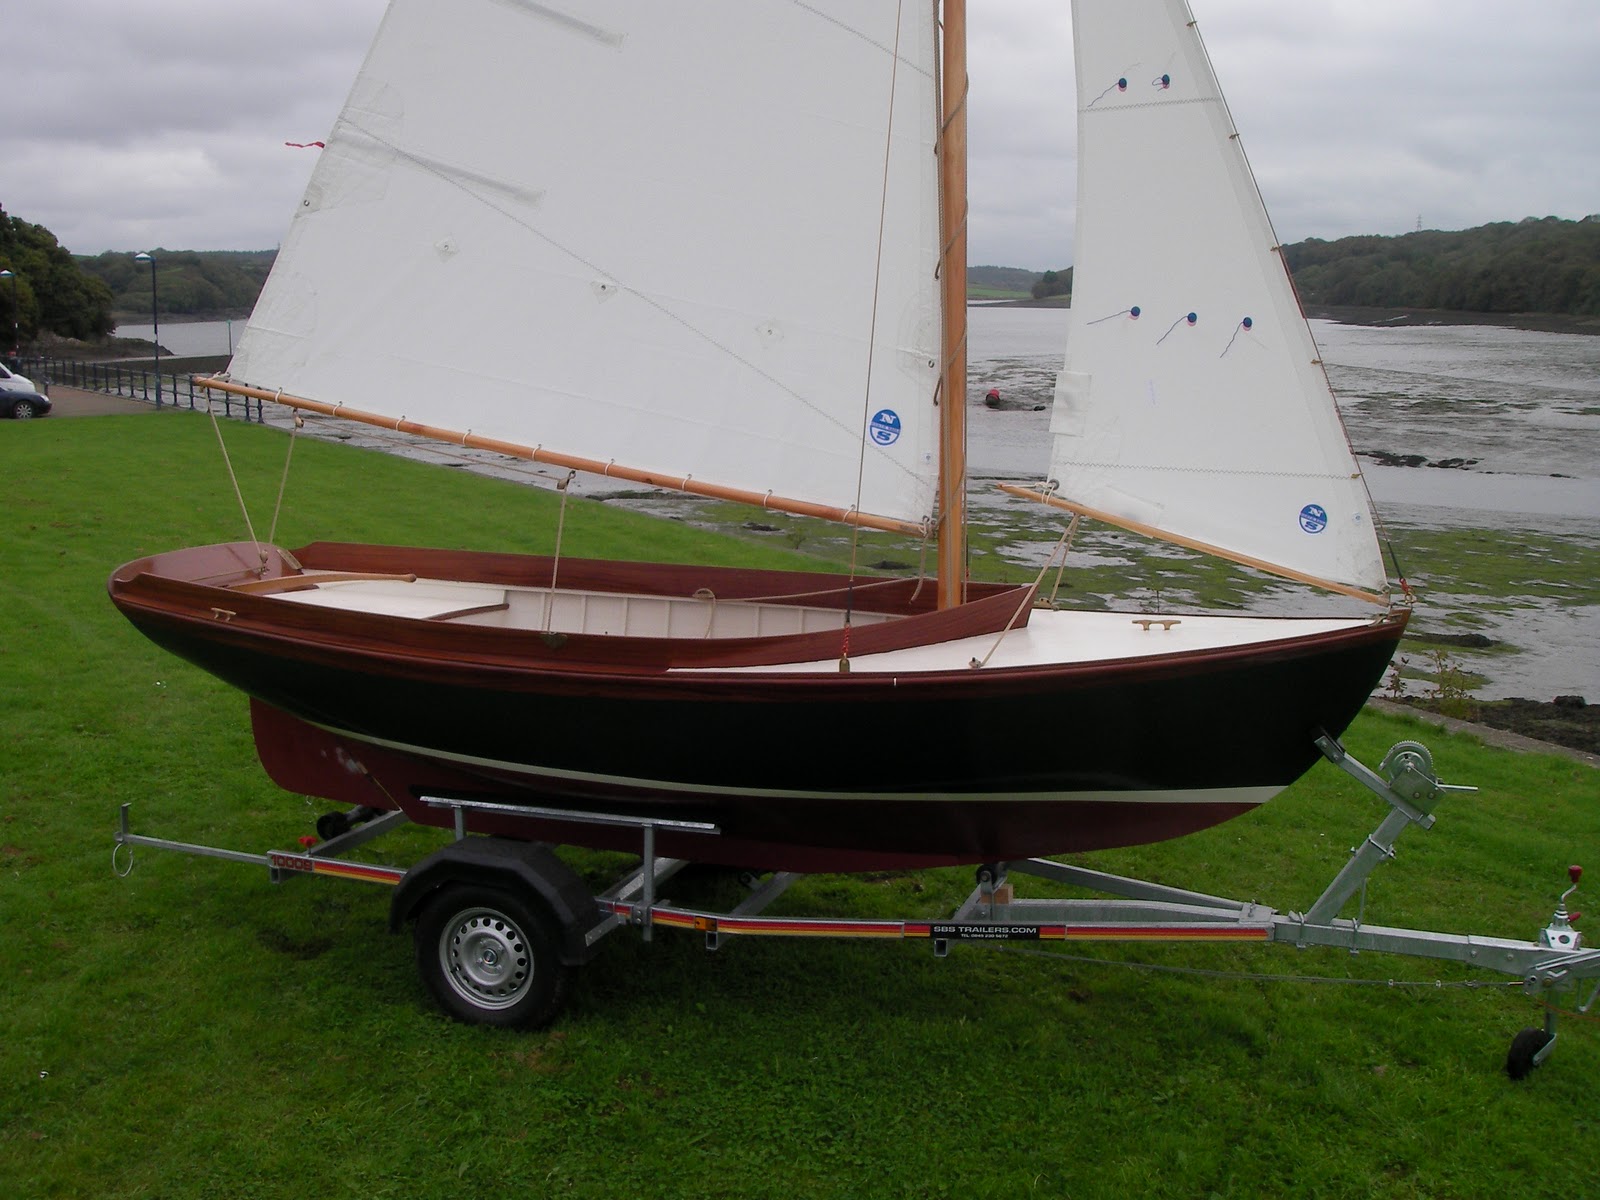 Butler &amp; Co Boats for Sale: The Haven 12.5 - A â€˜proper 